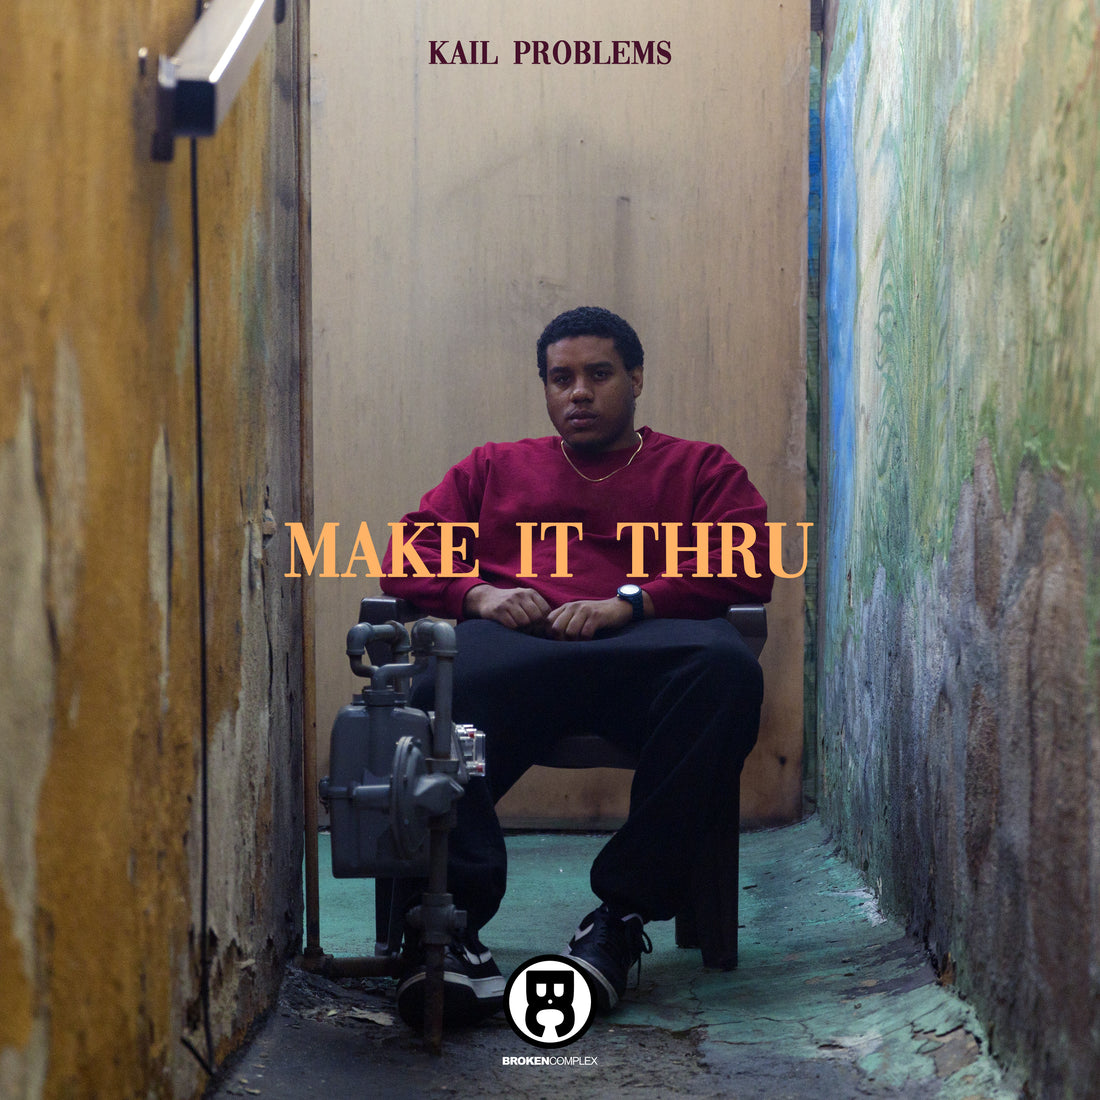 New Release: Kail Problems - Make It Thru